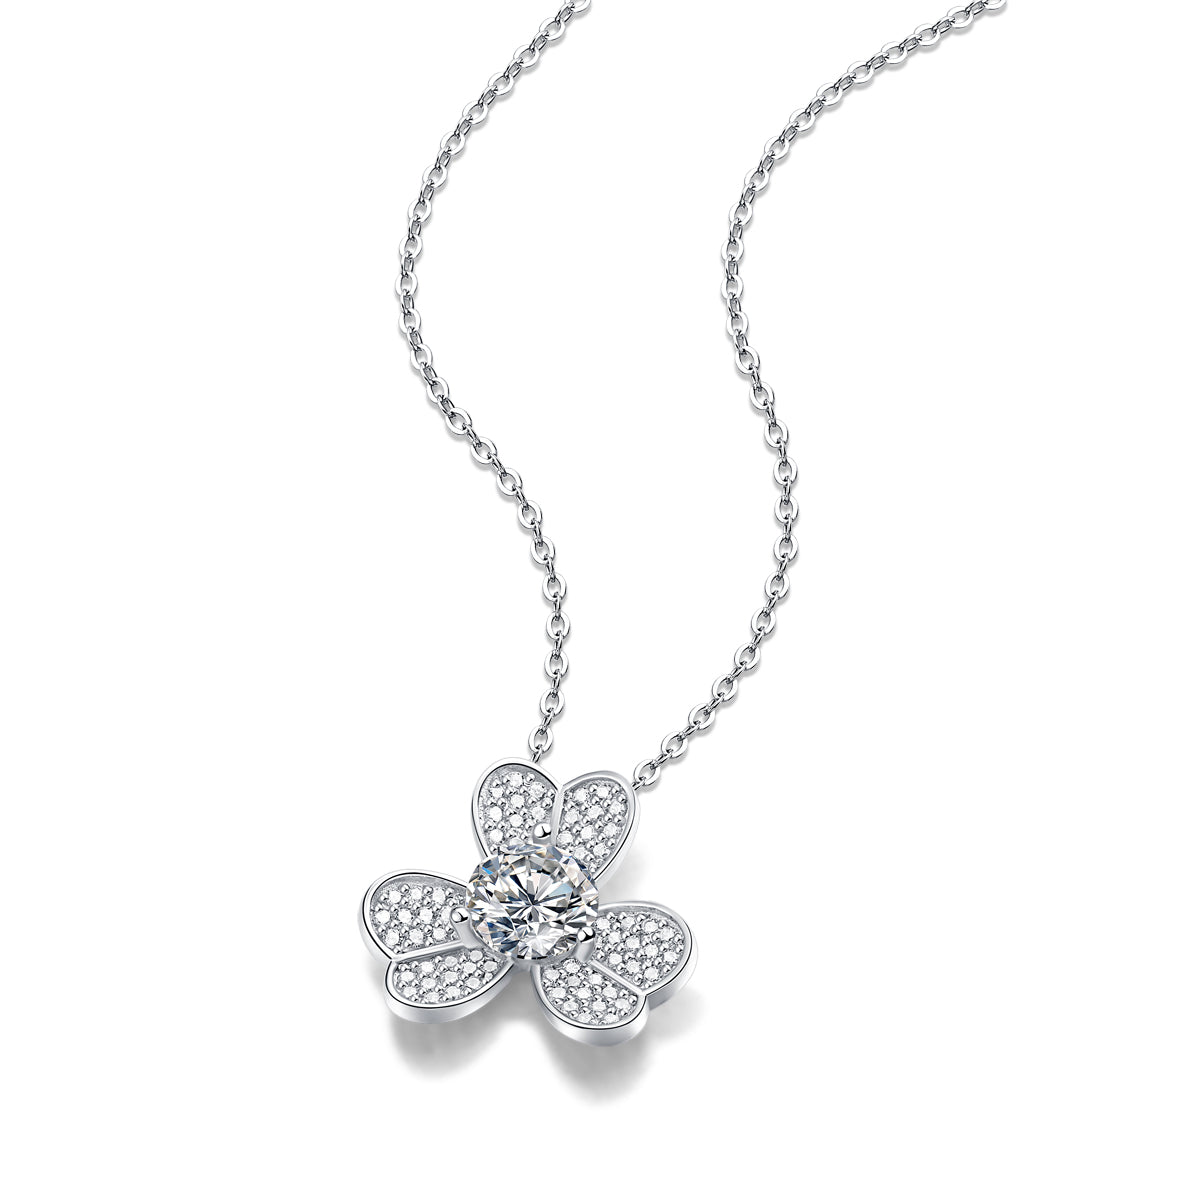 Golston™ 1ct Clover Mosan Diamond Necklace, 16-18inches Chain Adjustable*